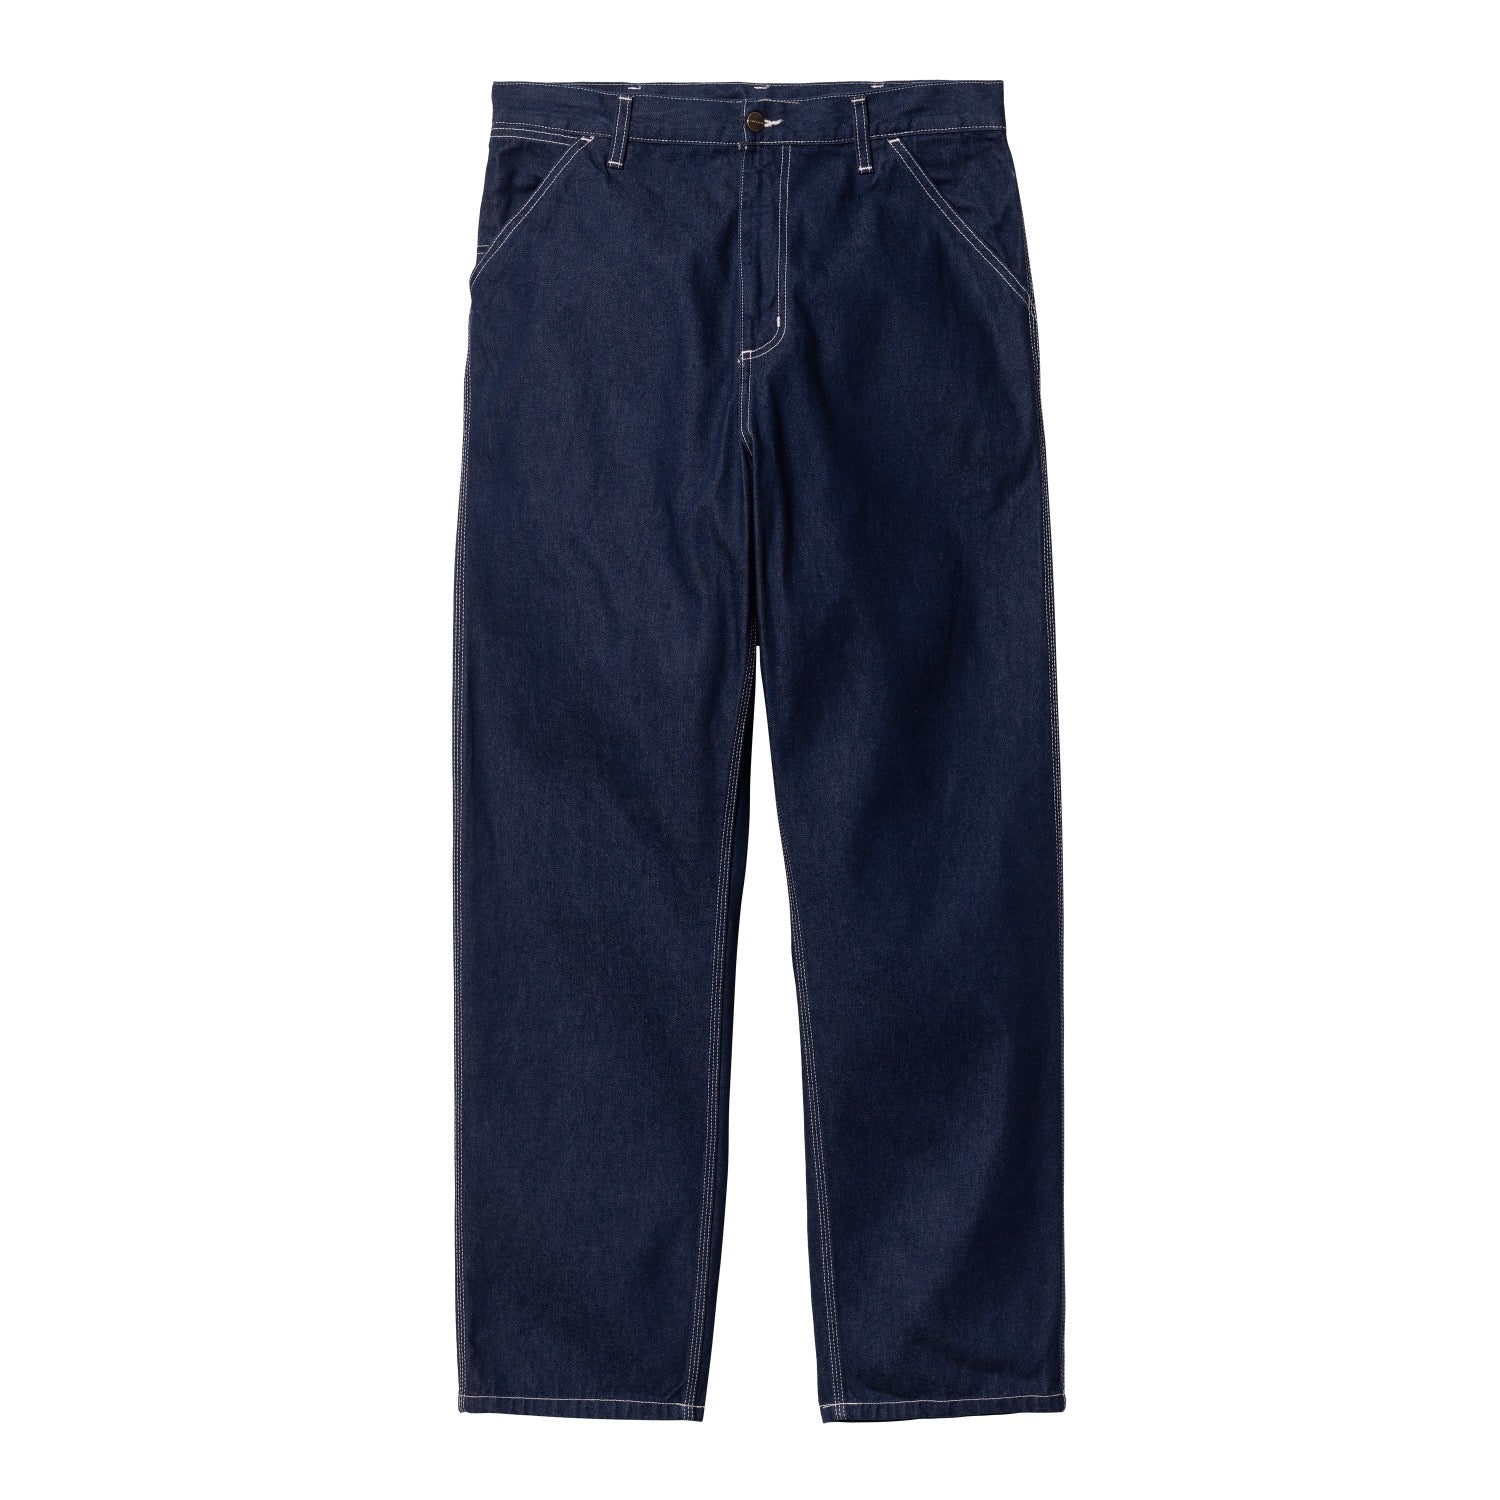 SIMPLE PANT - Blue (one wash)